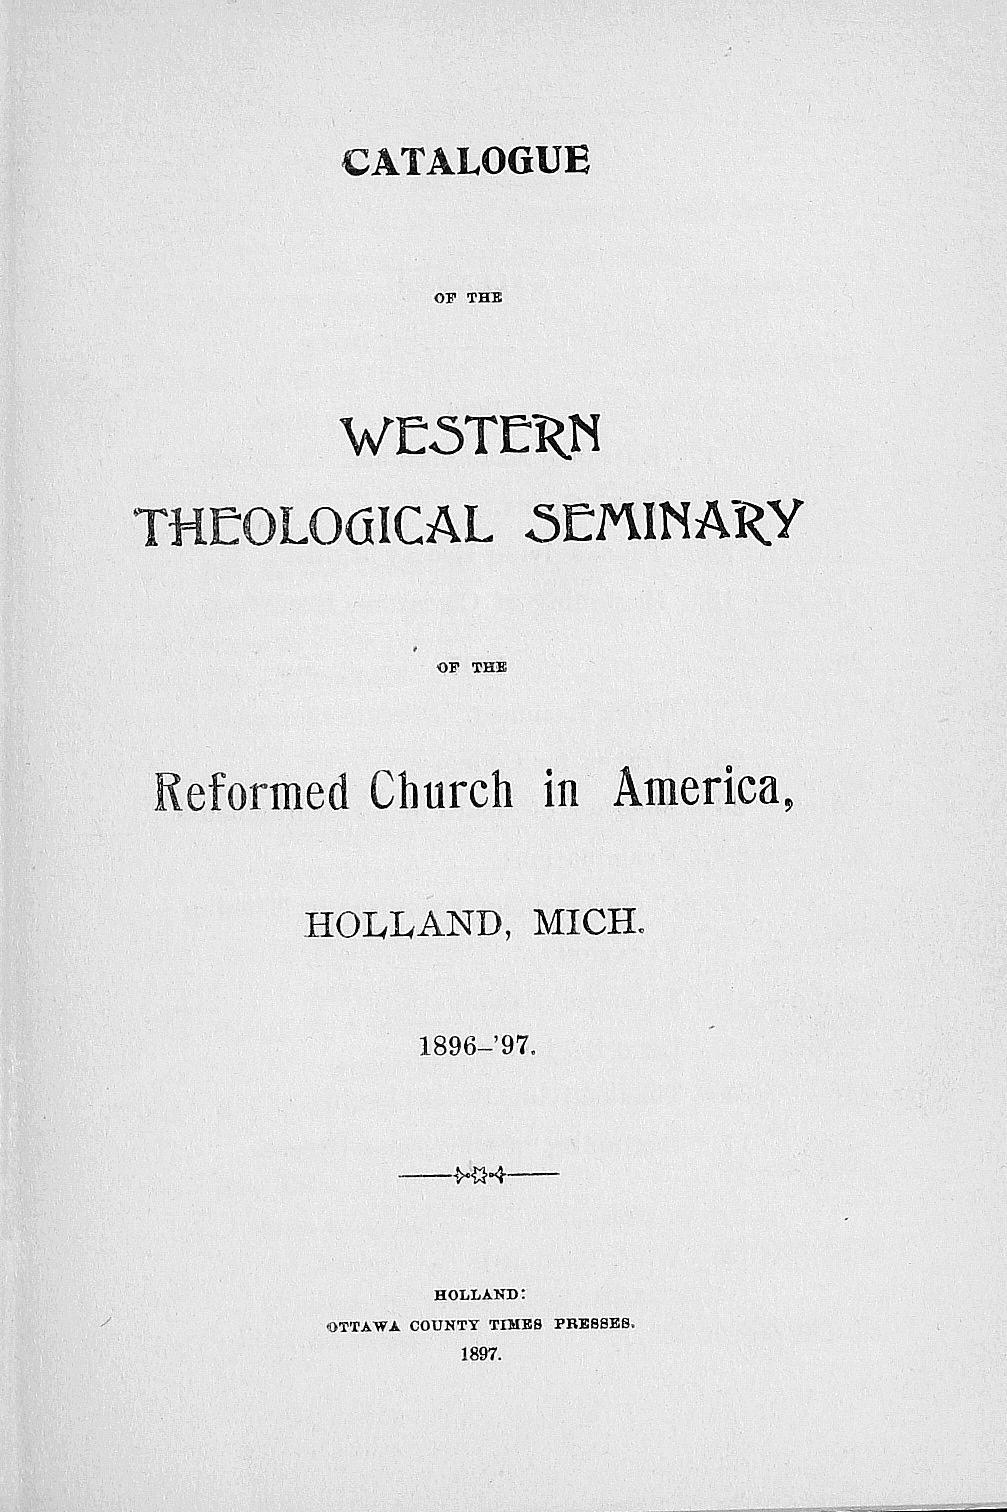 CATALOGUE OF THE WE5TERN THEOLOGICAL SEMINARY OF THE Reformed Church in